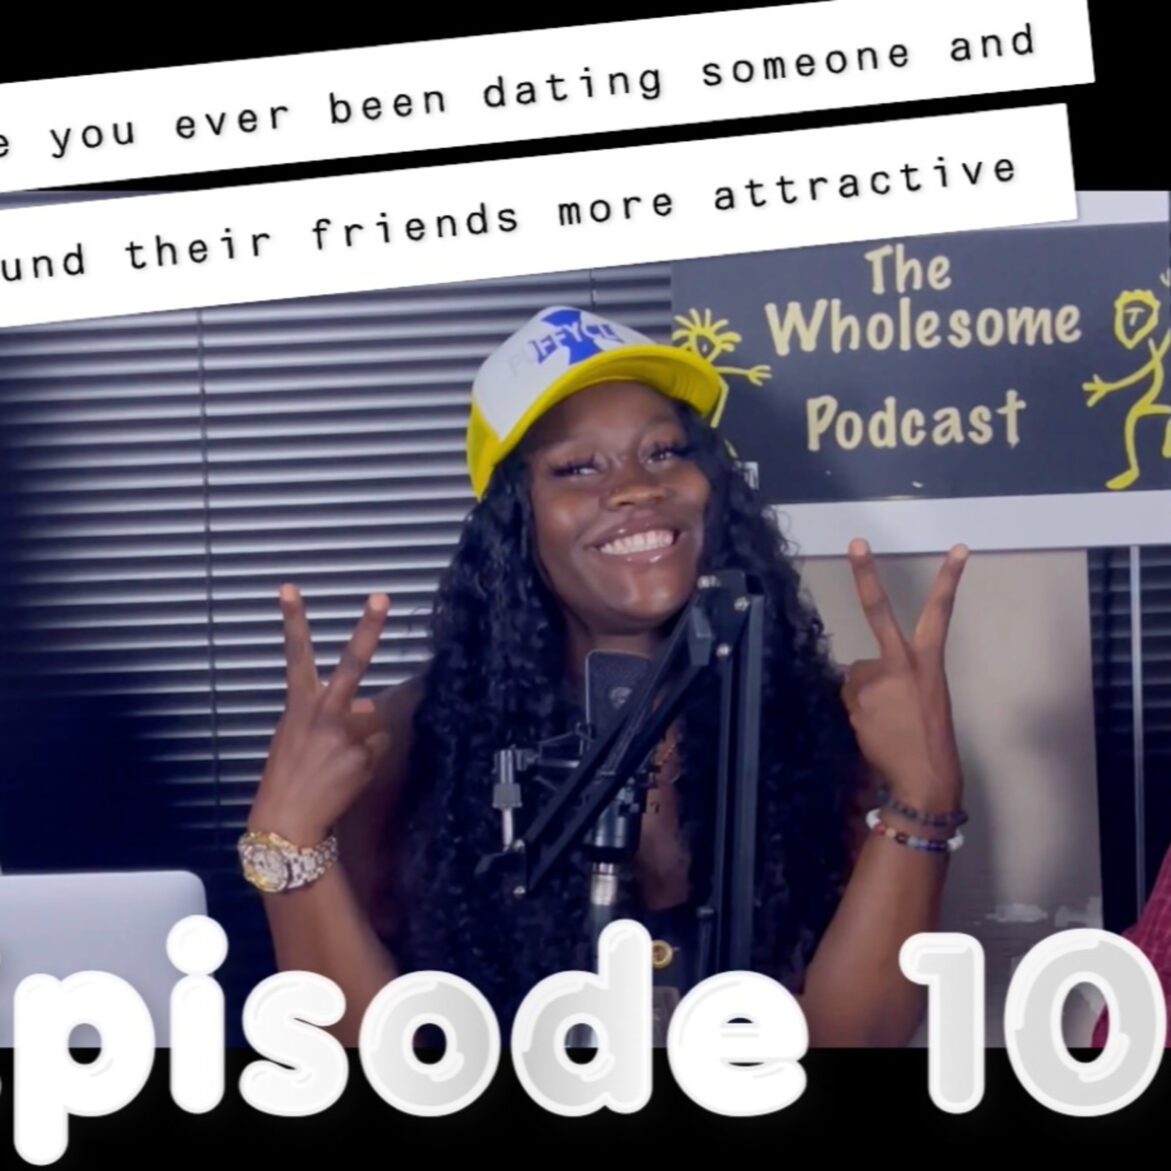 Black Podcasting - Episode 102| Have you ever been dating someone and found their friend more attractive?